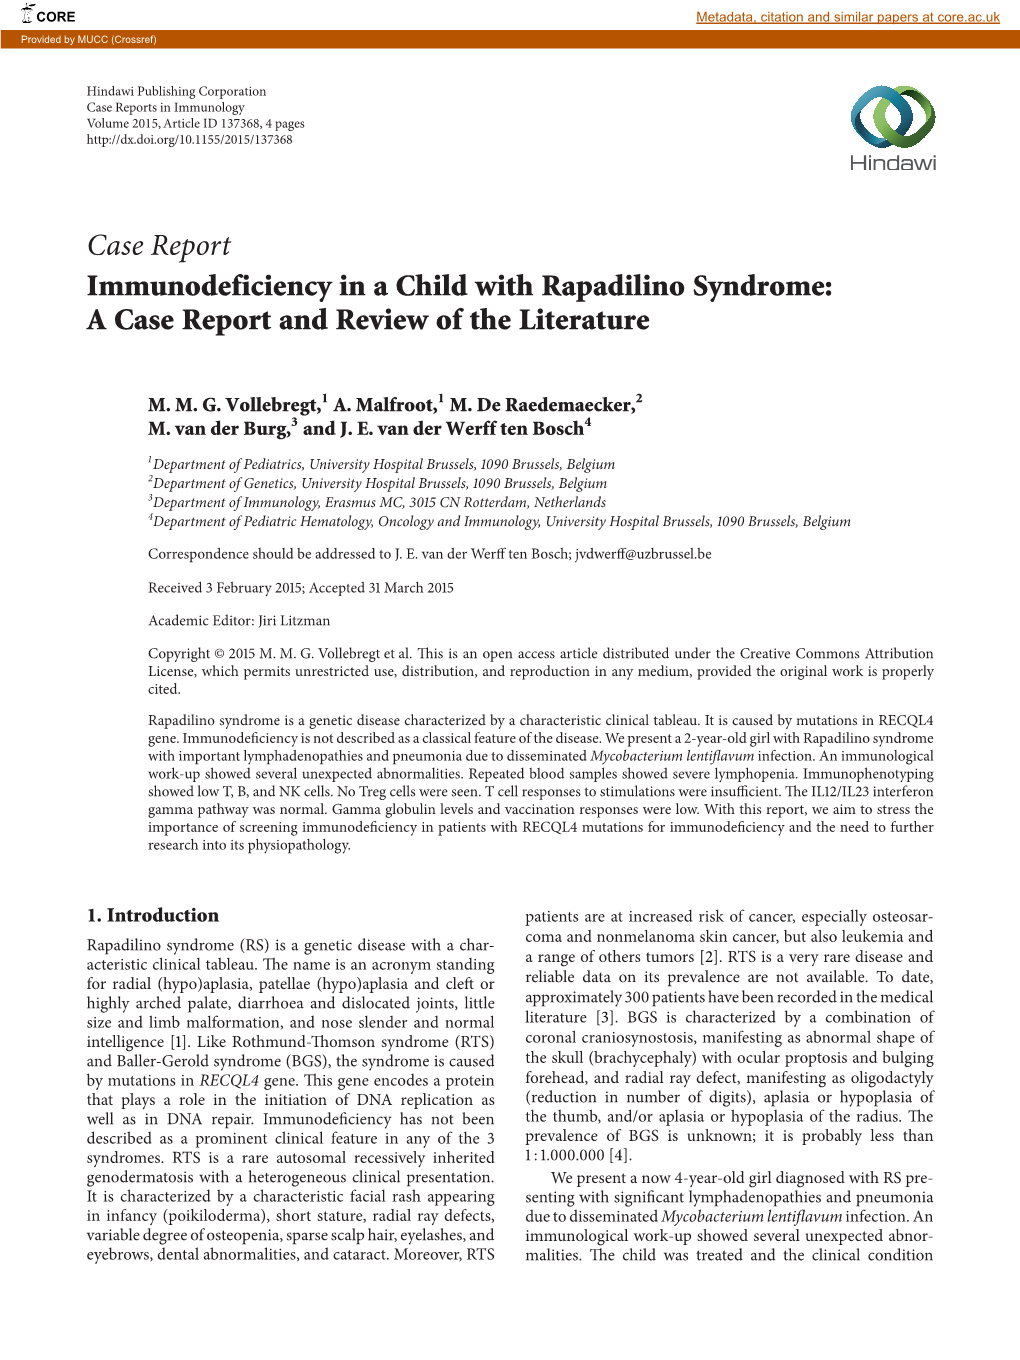 Case Report Immunodeficiency in a Child with Rapadilino Syndrome: a Case Report and Review of the Literature